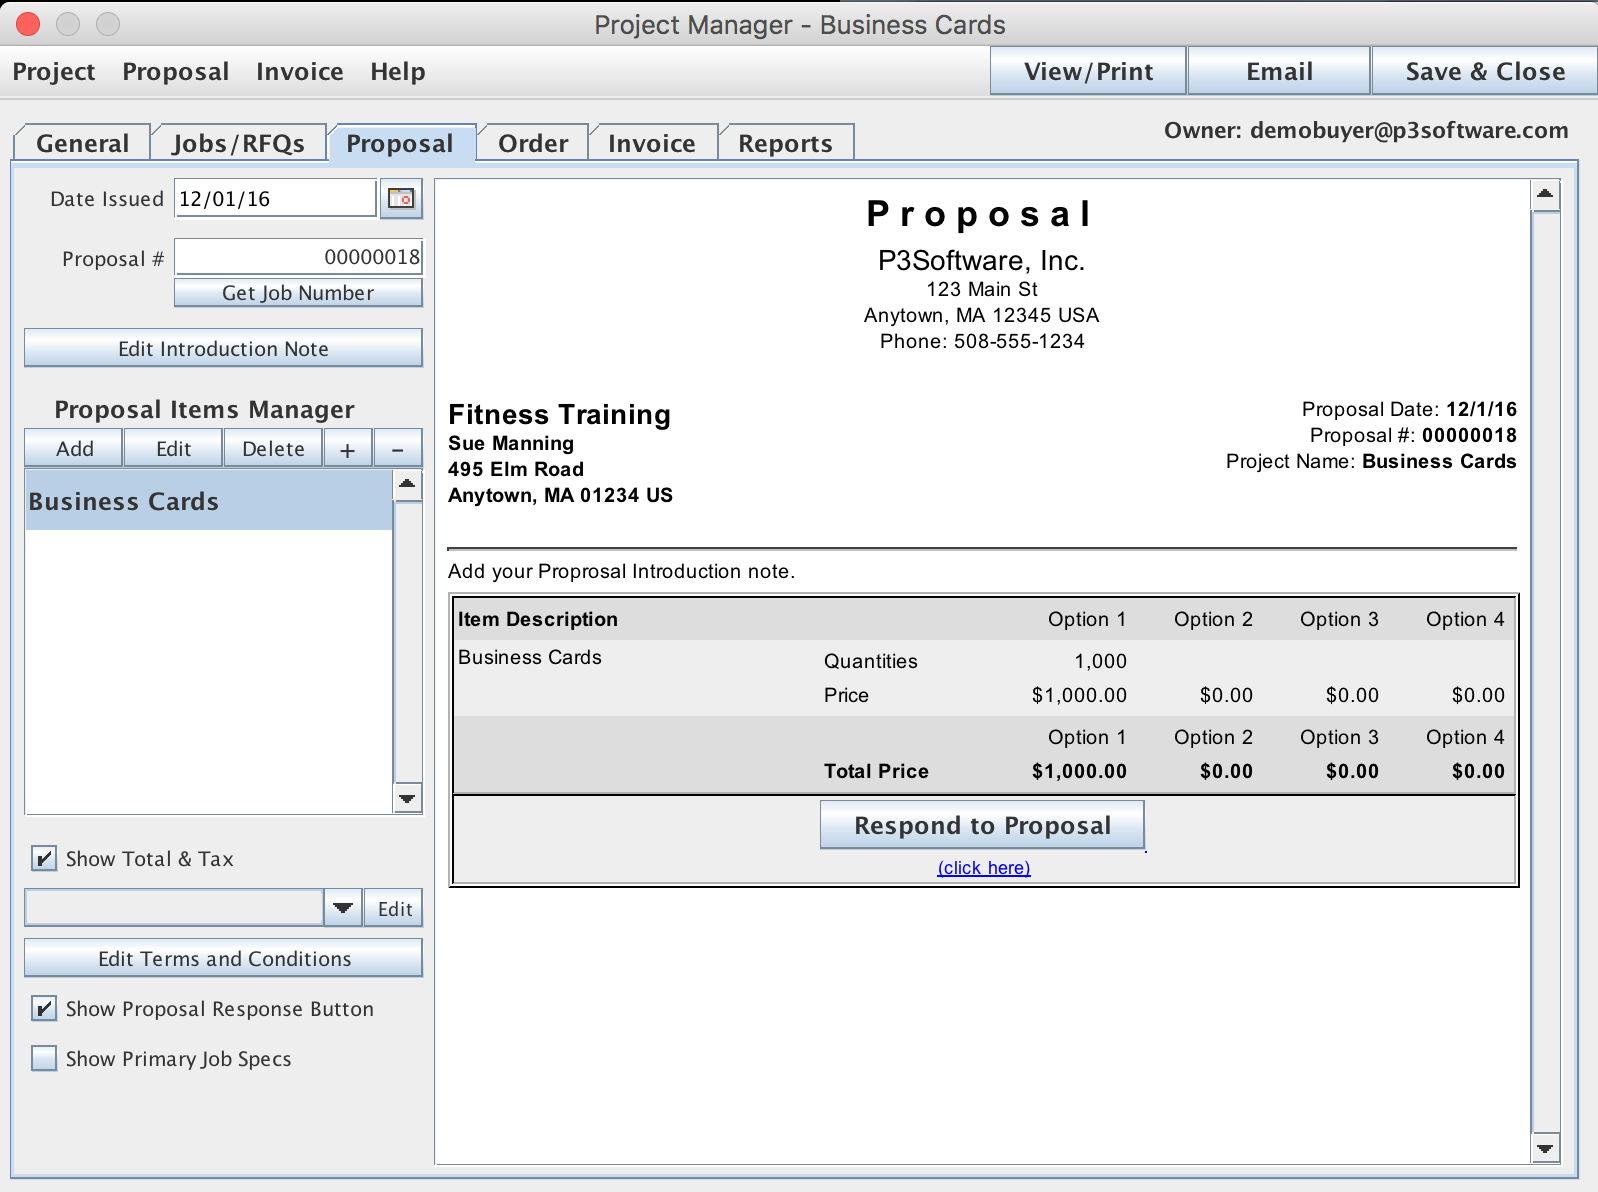 Proposal Tab within the Project Manager